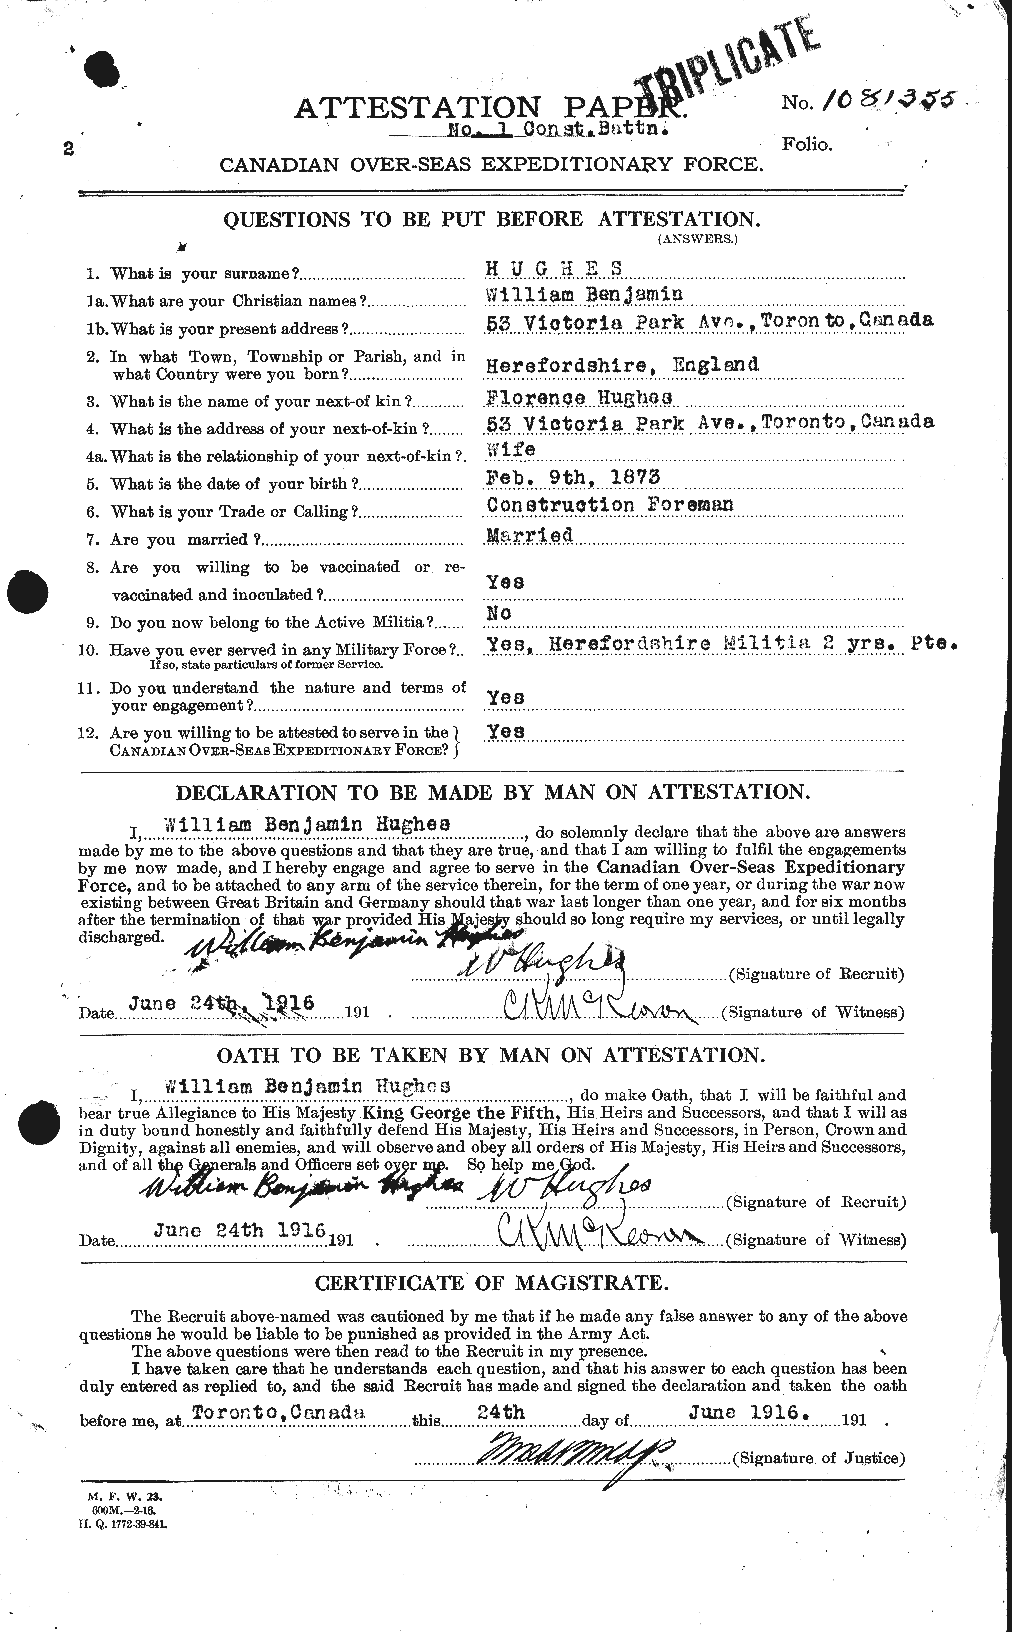 Personnel Records of the First World War - CEF 405911a